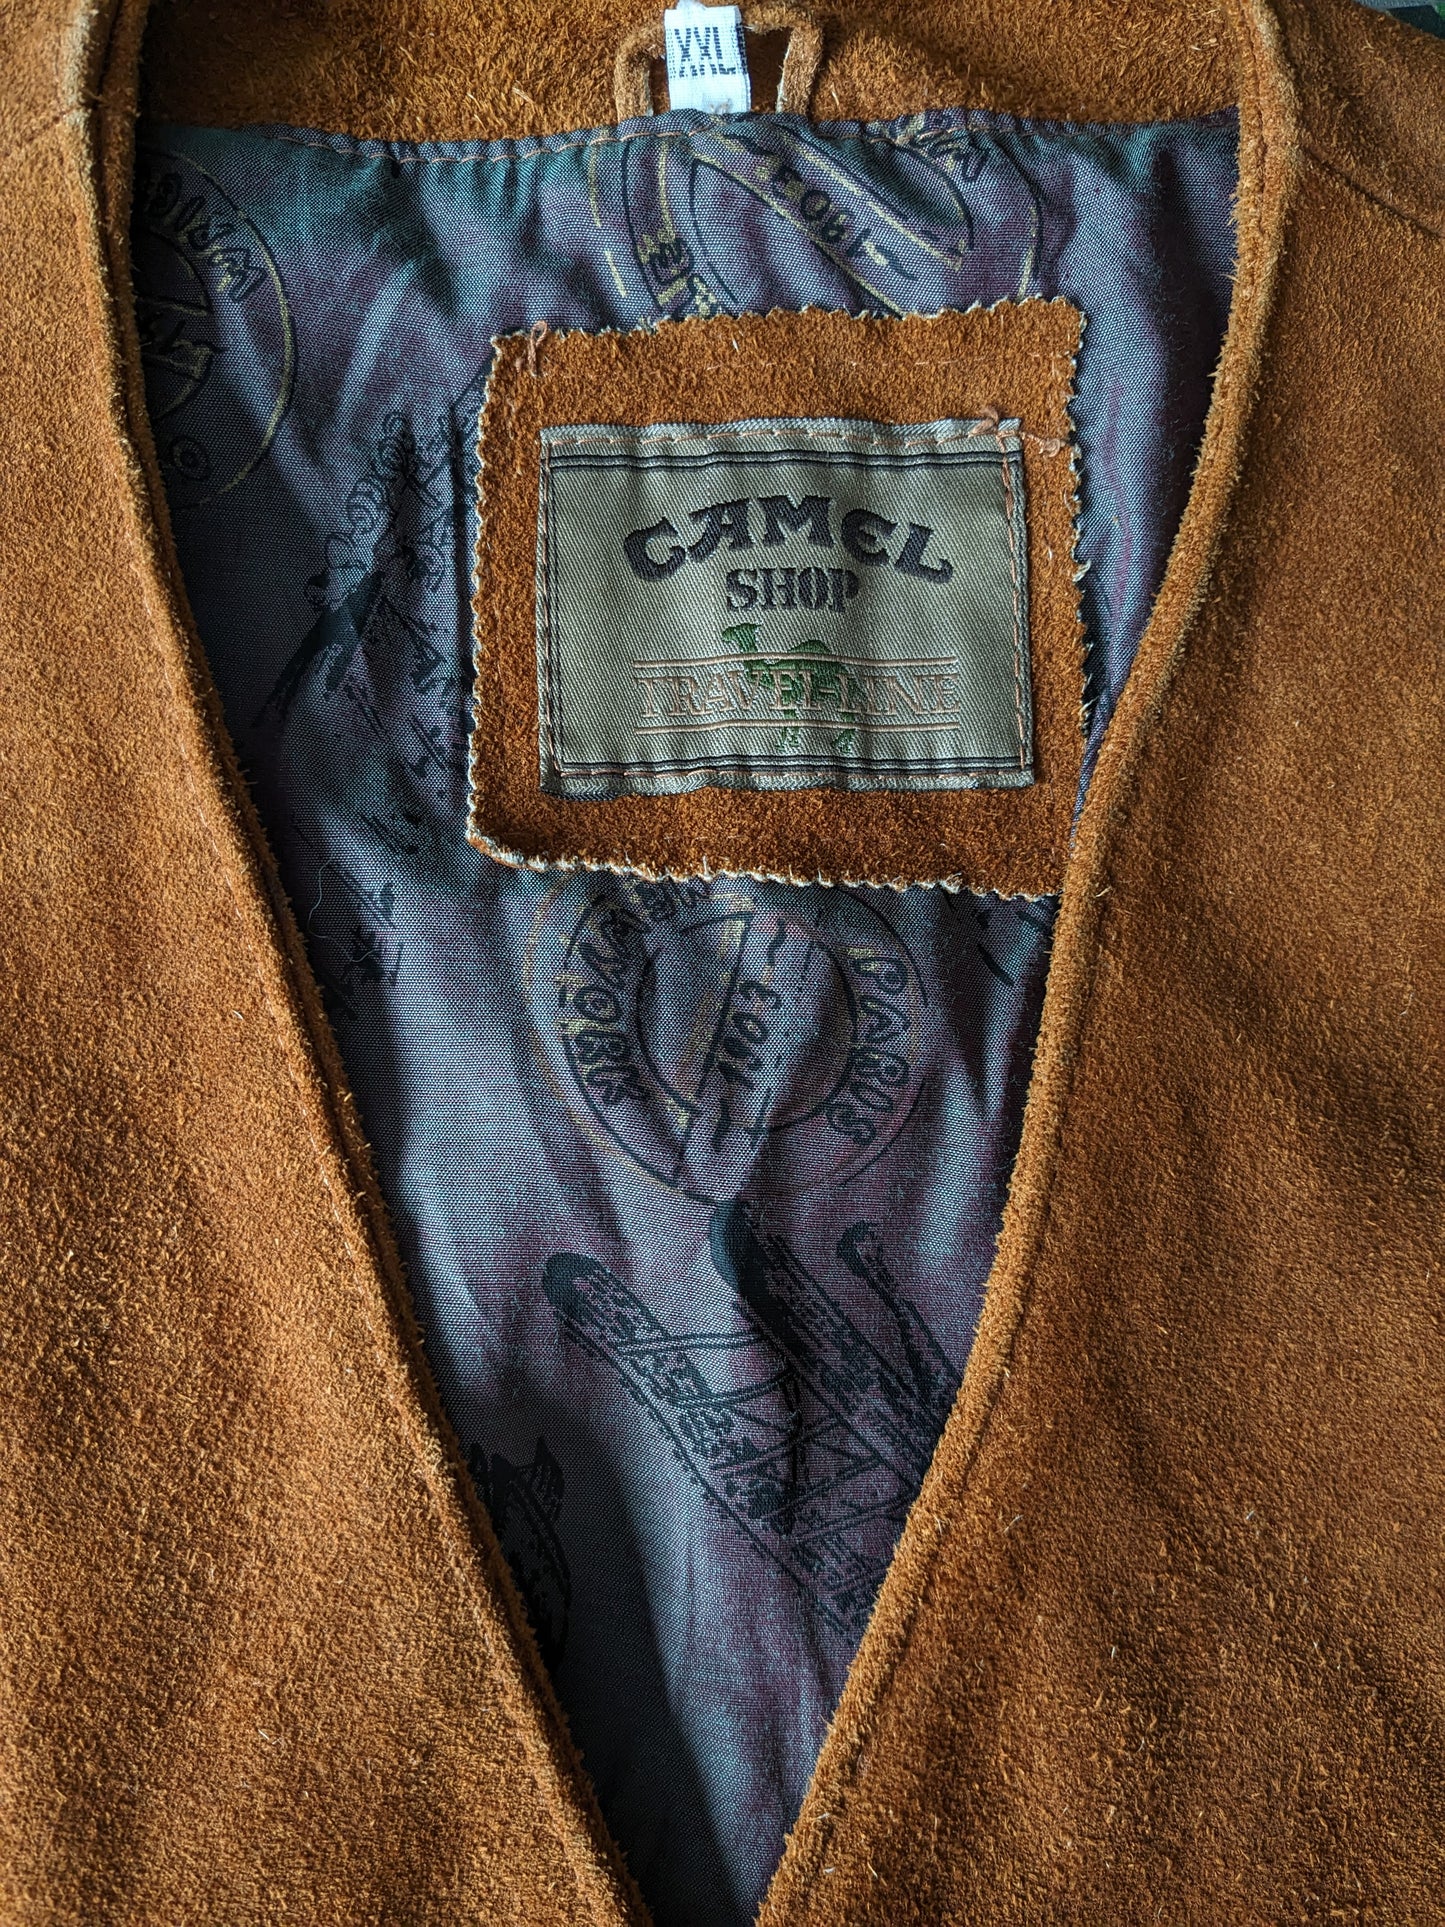 Camel double -sided Learning / Suede waistcoat. Heavy quality. Brown with inner pocket. Size XXL / 2XL.